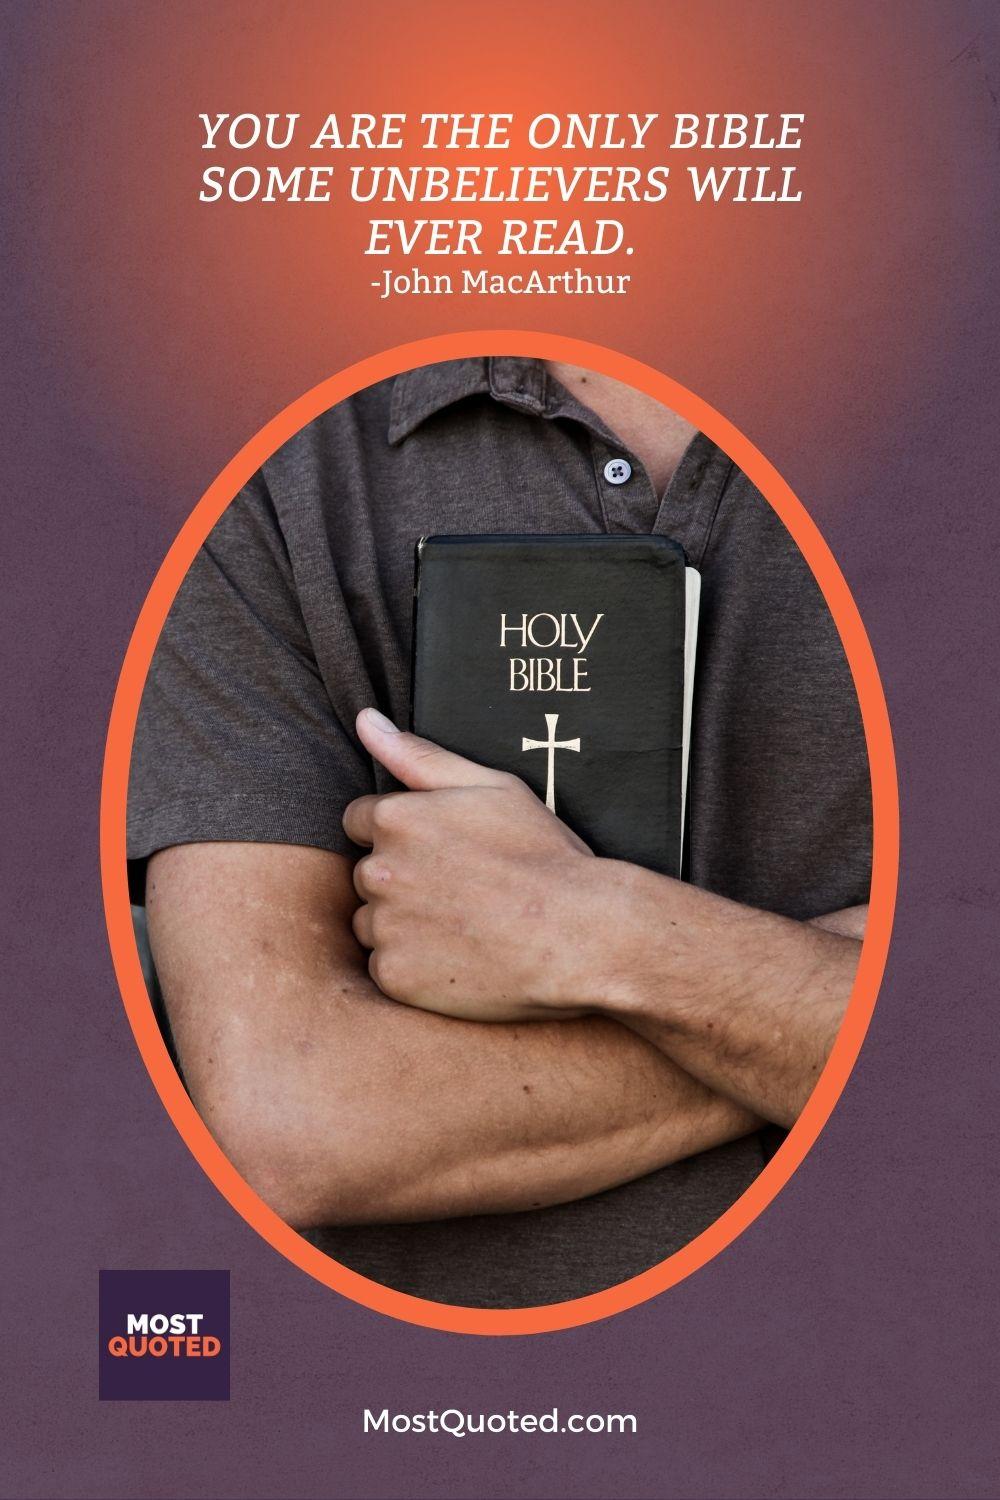 You are the only Bible some unbelievers will ever read. - John MacArthur